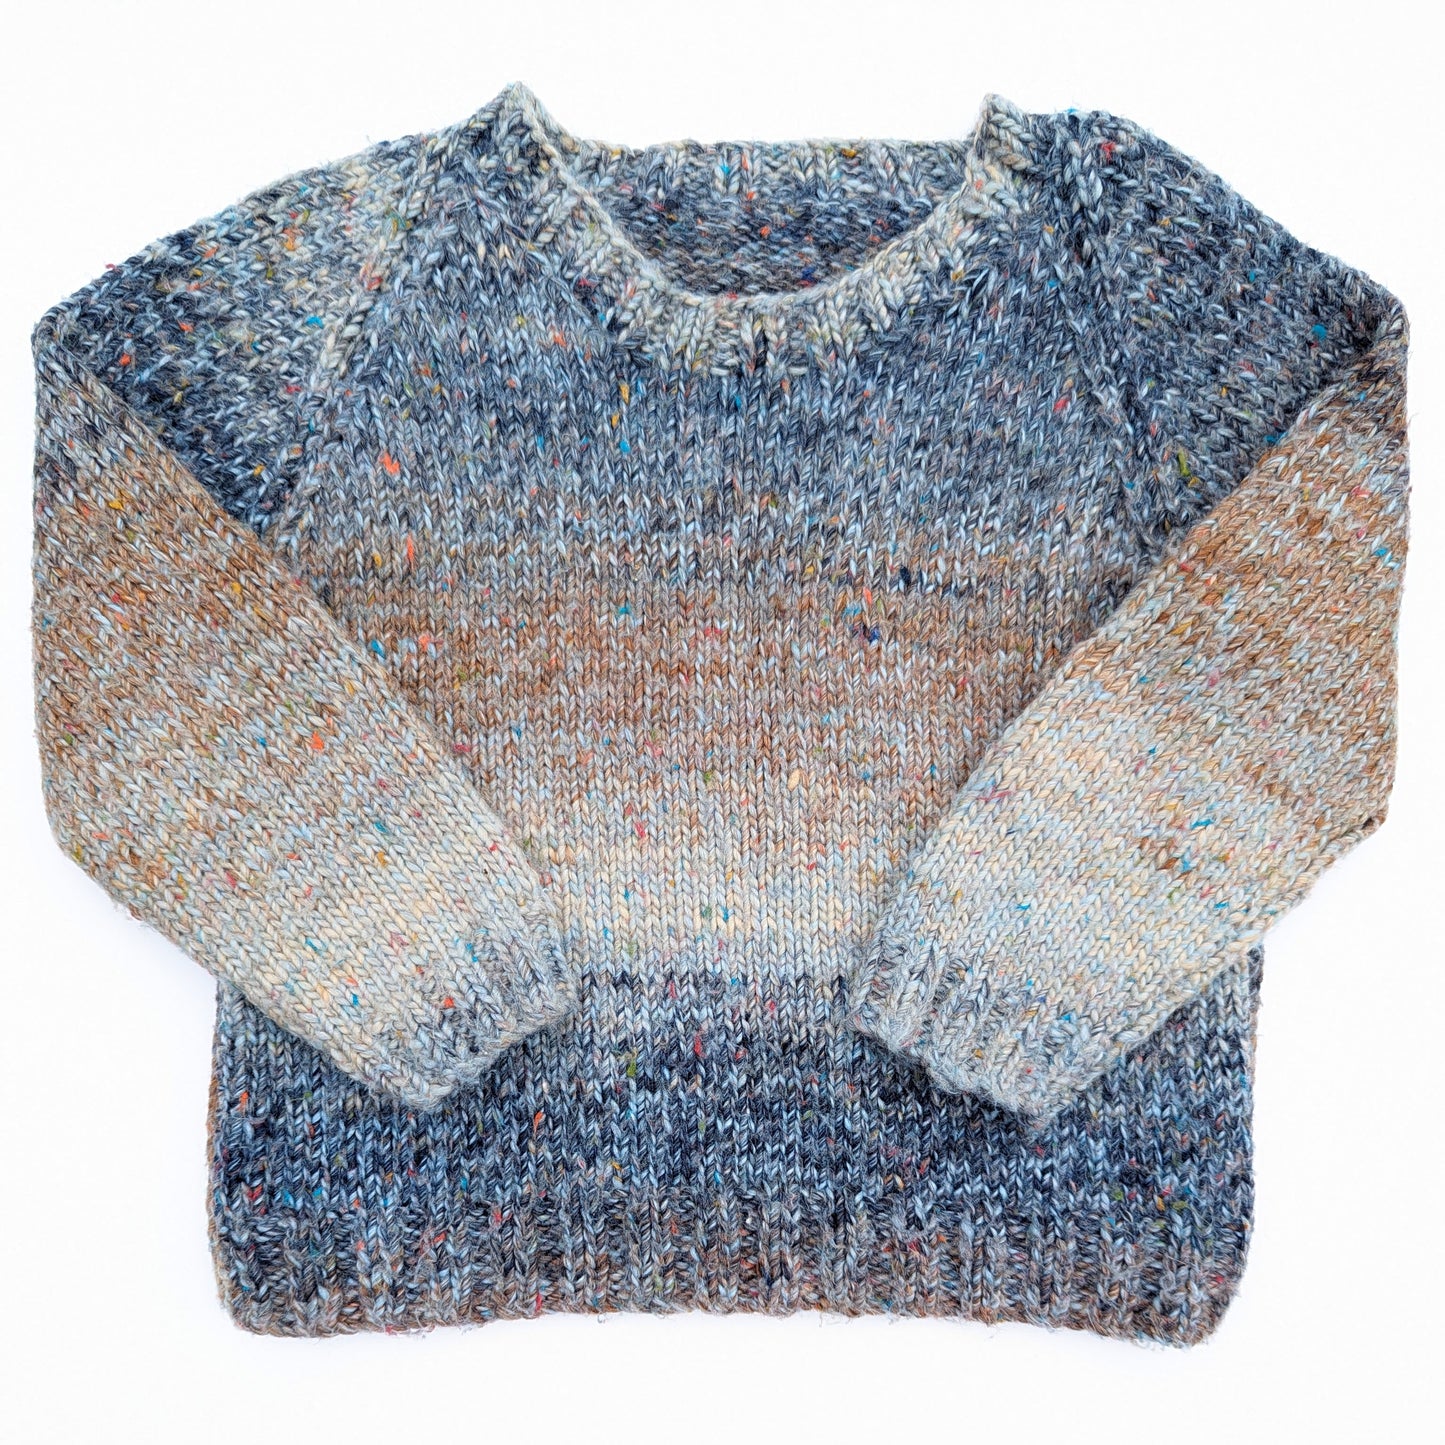 Autumn Ombre Jumper 6-8 years